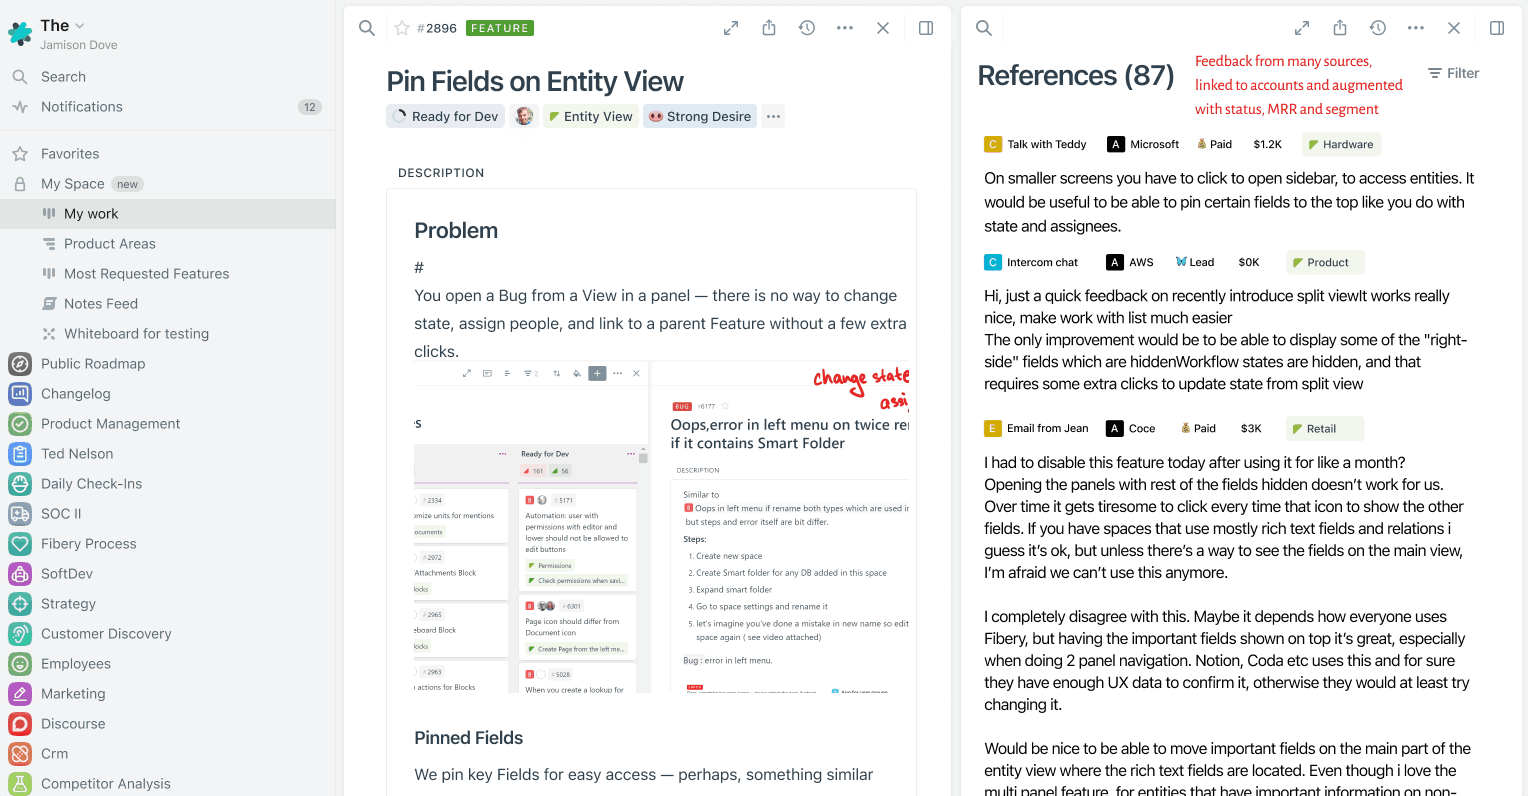 All feedback in Fibery is connected to features. You can filter it by account status, MRR, segment.